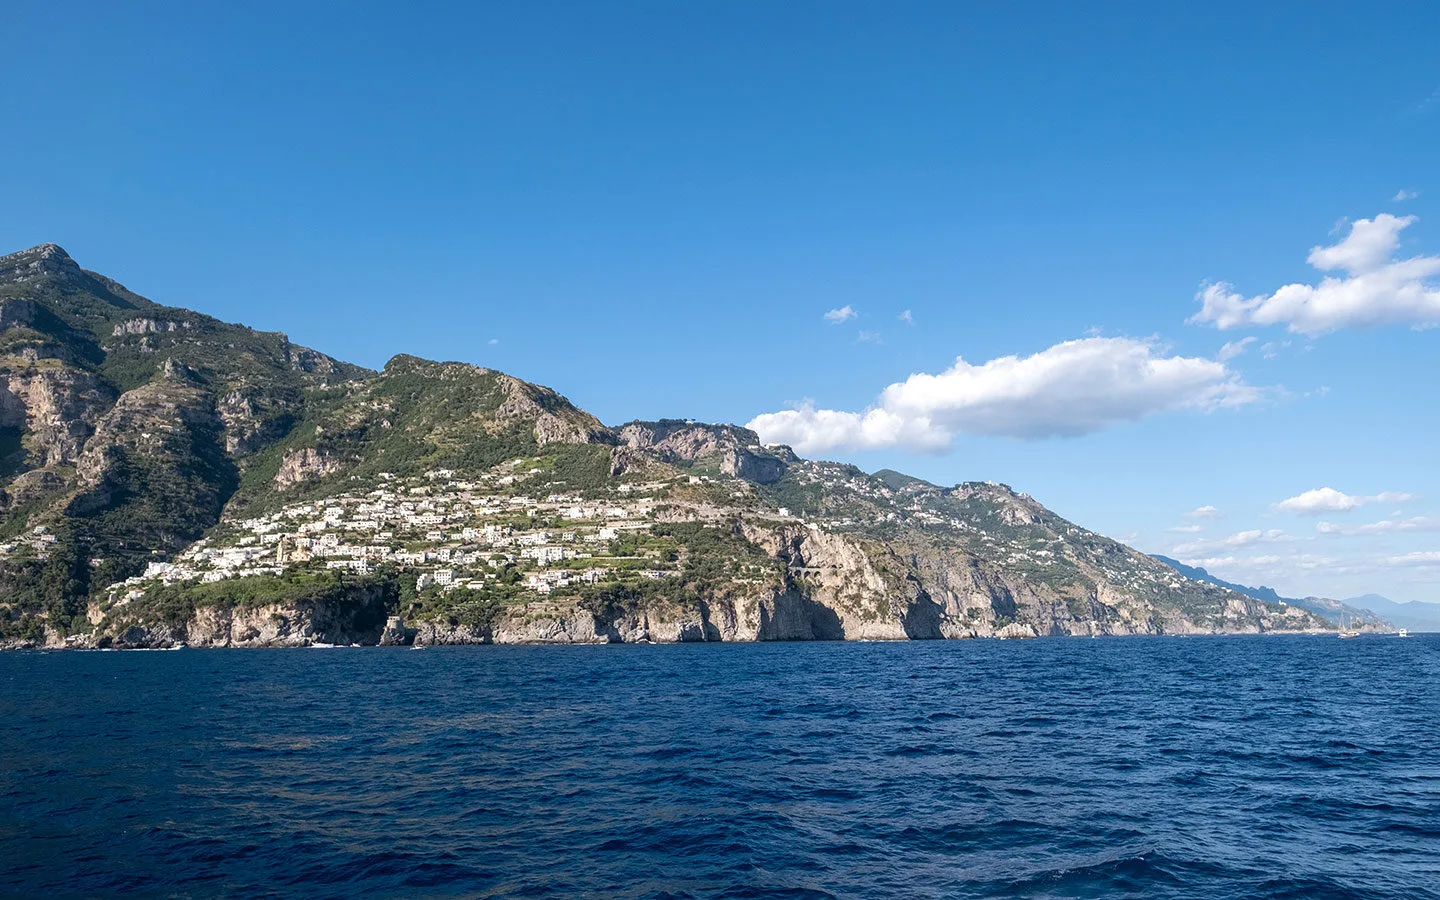 Looking along the Amalfi Coast from a boat trip